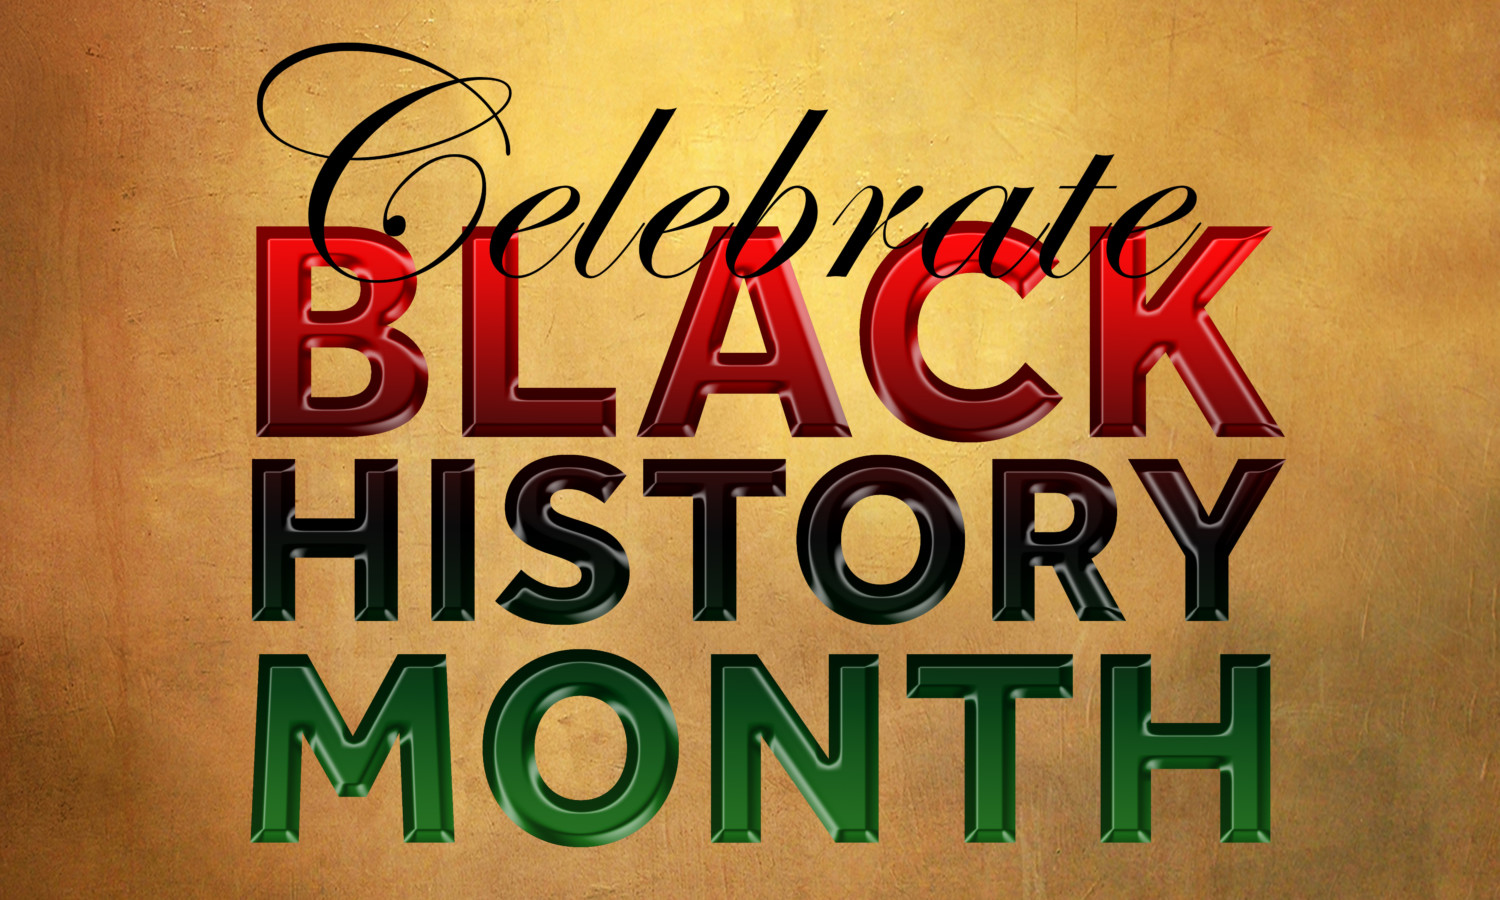 10 meaningful ways to honor Black History Month